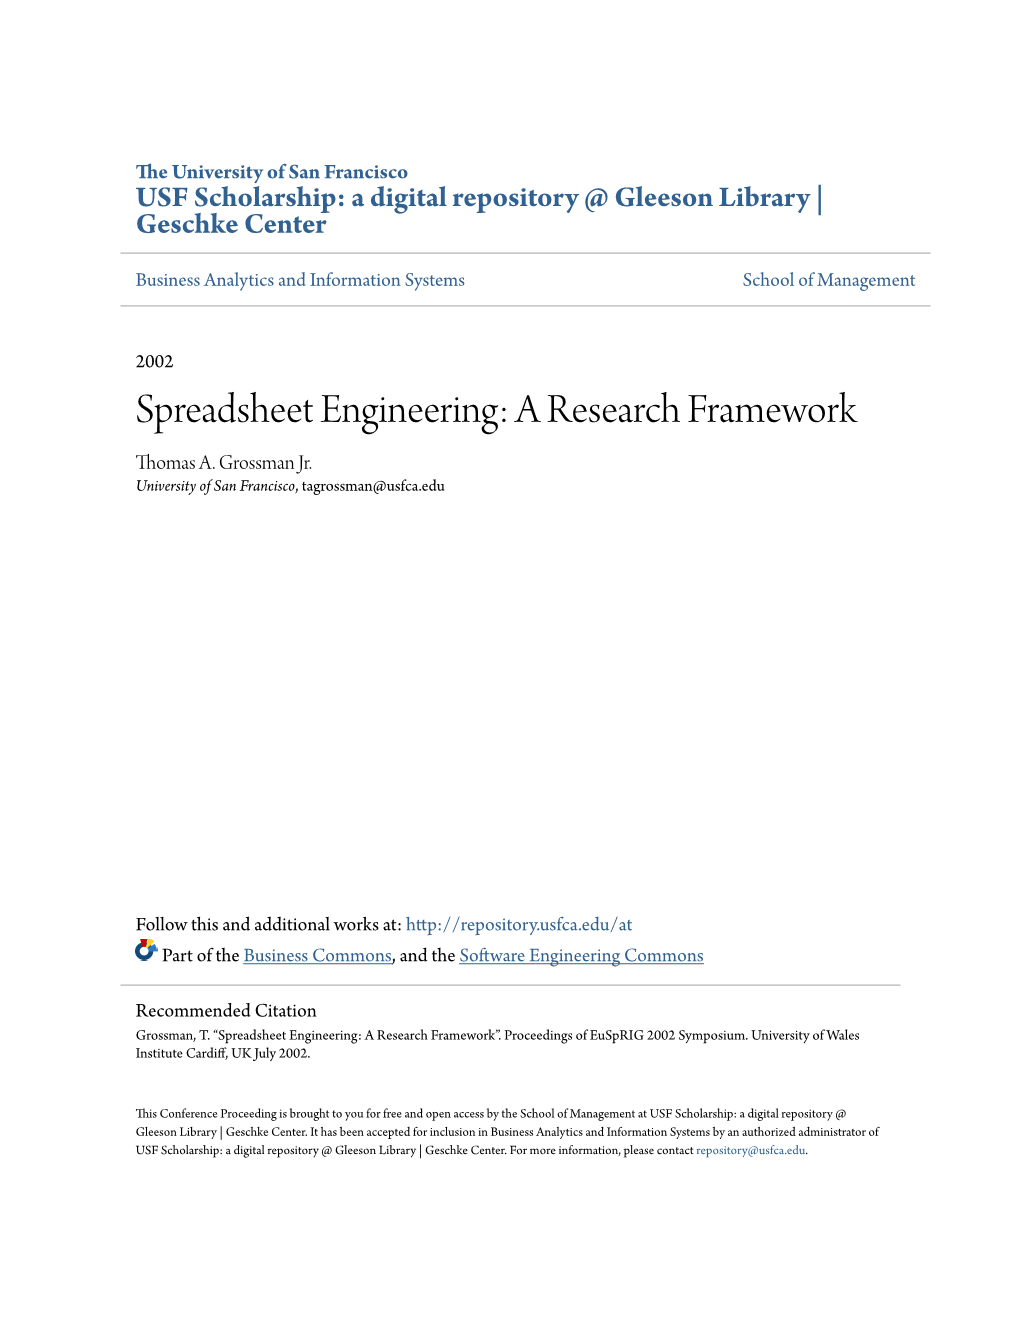 Spreadsheet Engineering: a Research Framework Thomas A